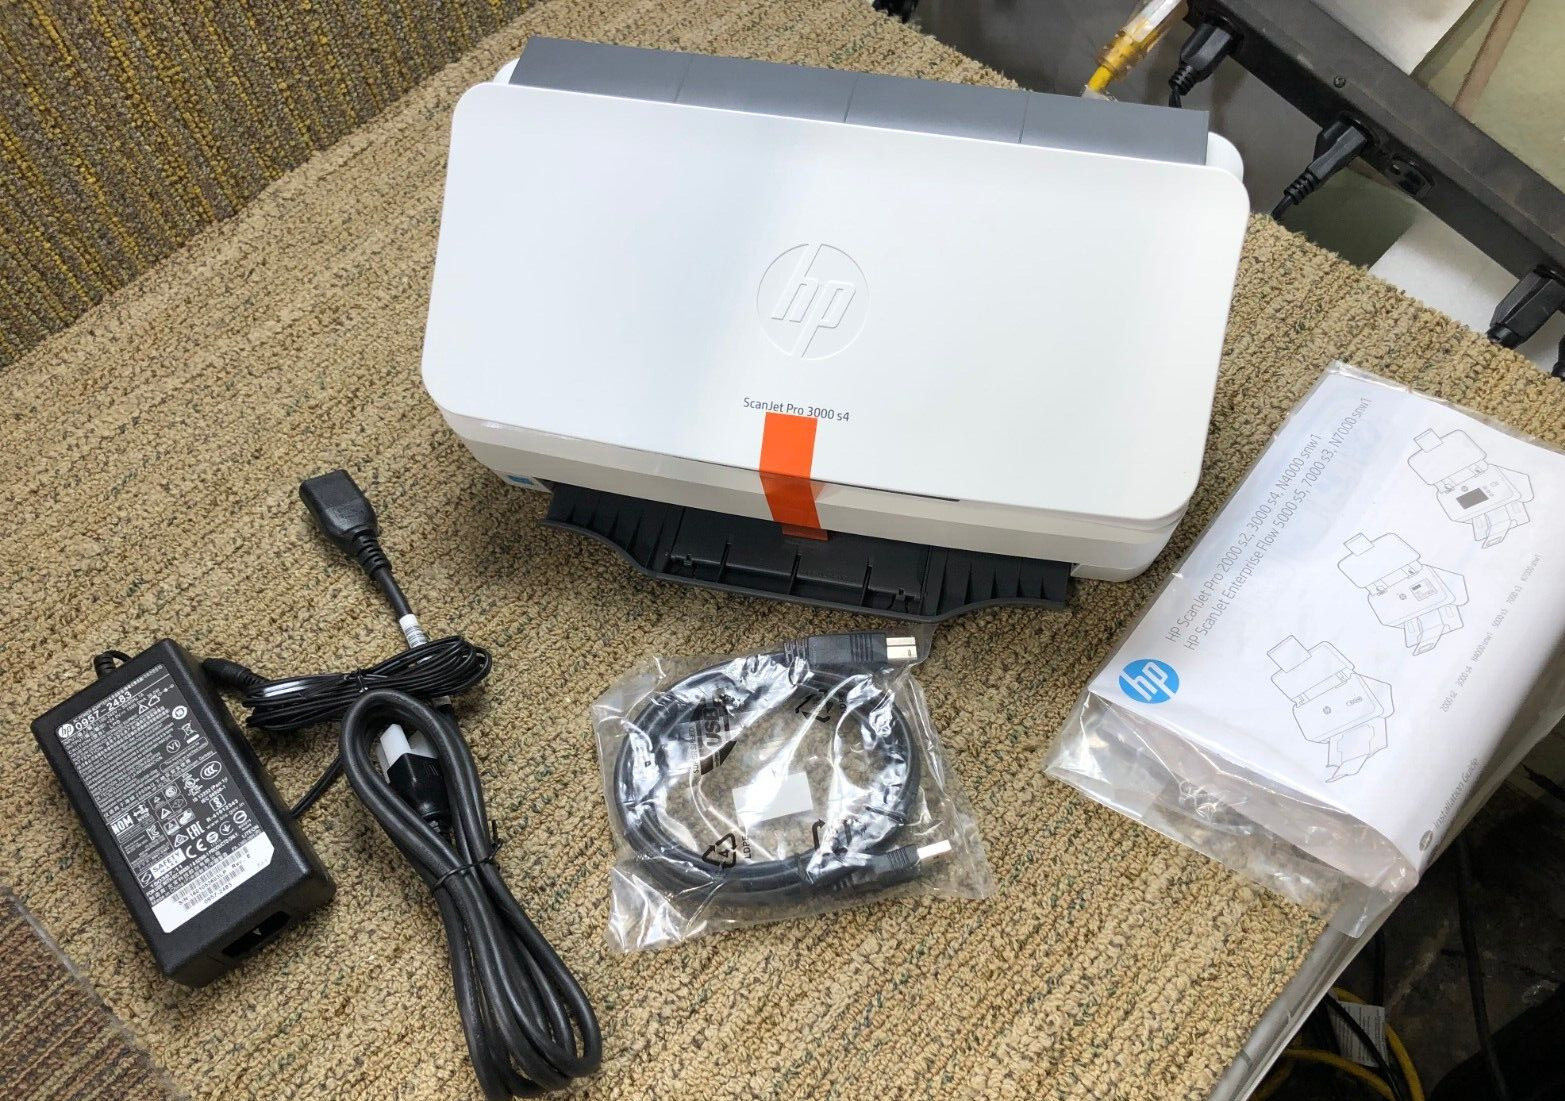 HP ScanJet Pro 3000 s4 Sheetfed Scanner -NEW IN OPEN OEM BOX